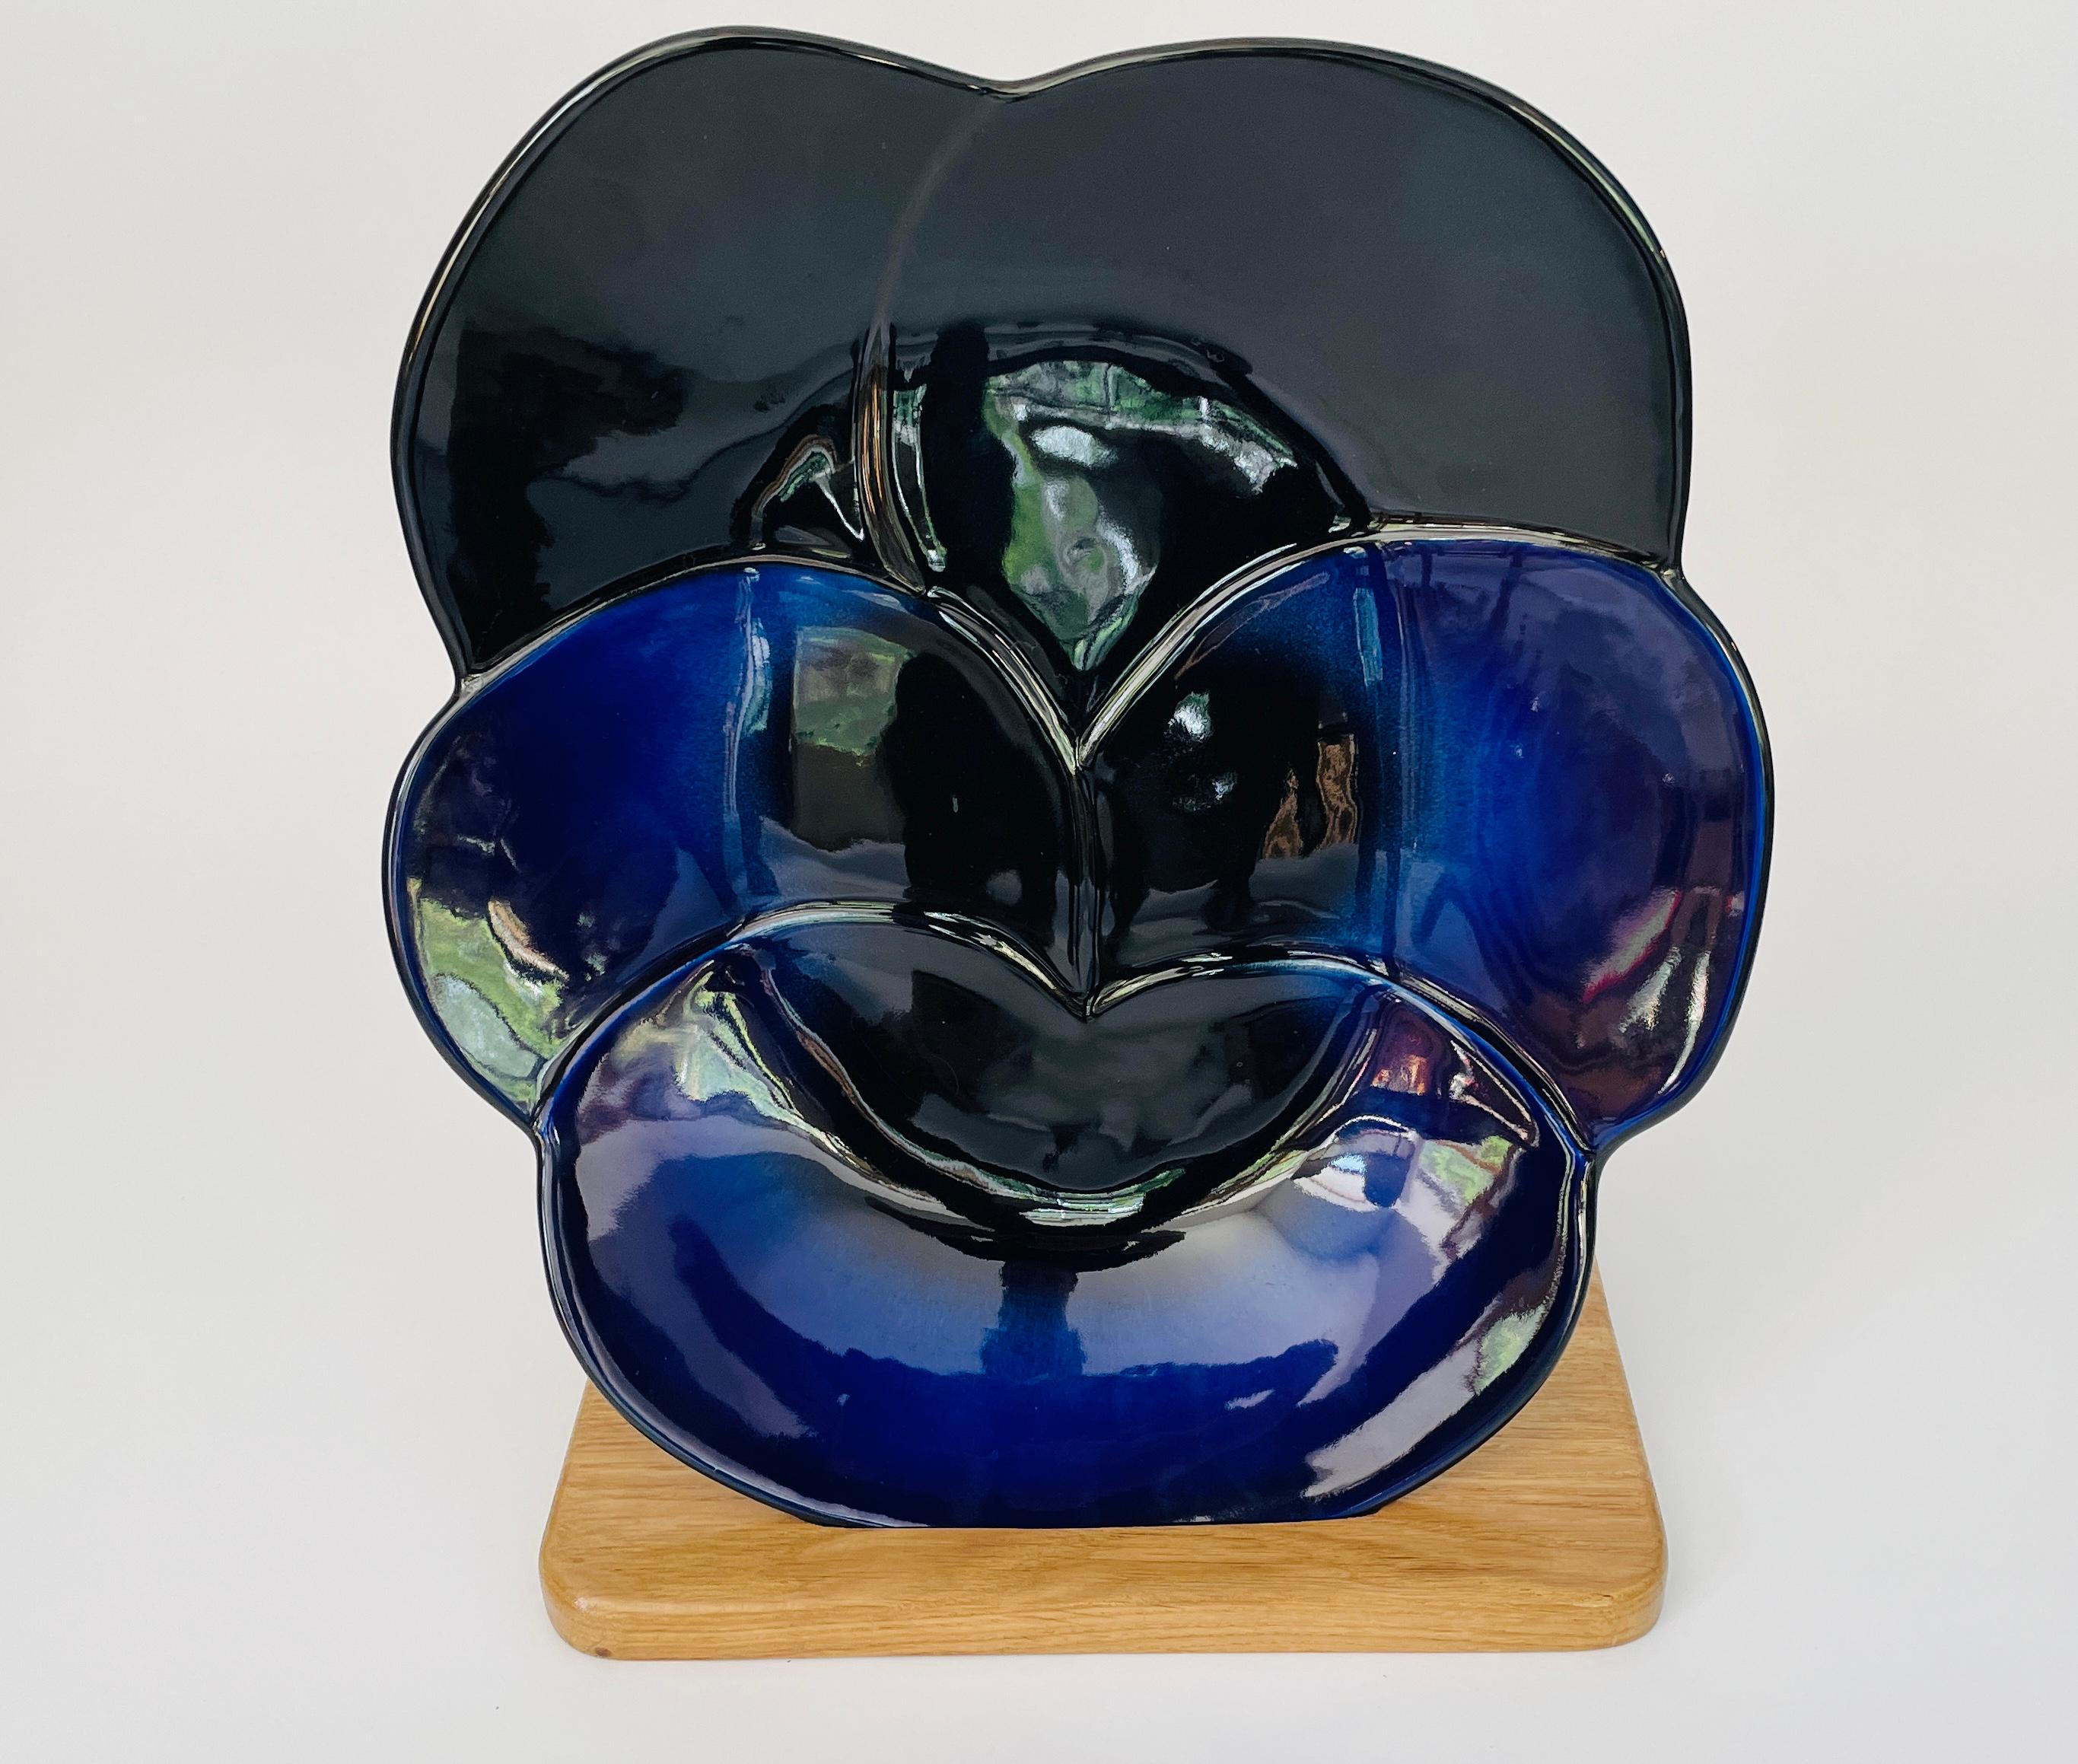 Decorative ceramic plate marked 'Viola 1967, Arabia Finland, Kaipiainen Invenit', numbered 917/3000. Design by Birger Kaipiainen (Finland, 1915-1988).

Viola (a flower, violet in Latin) features a beautiful black and blue glazing on a viola-shaped